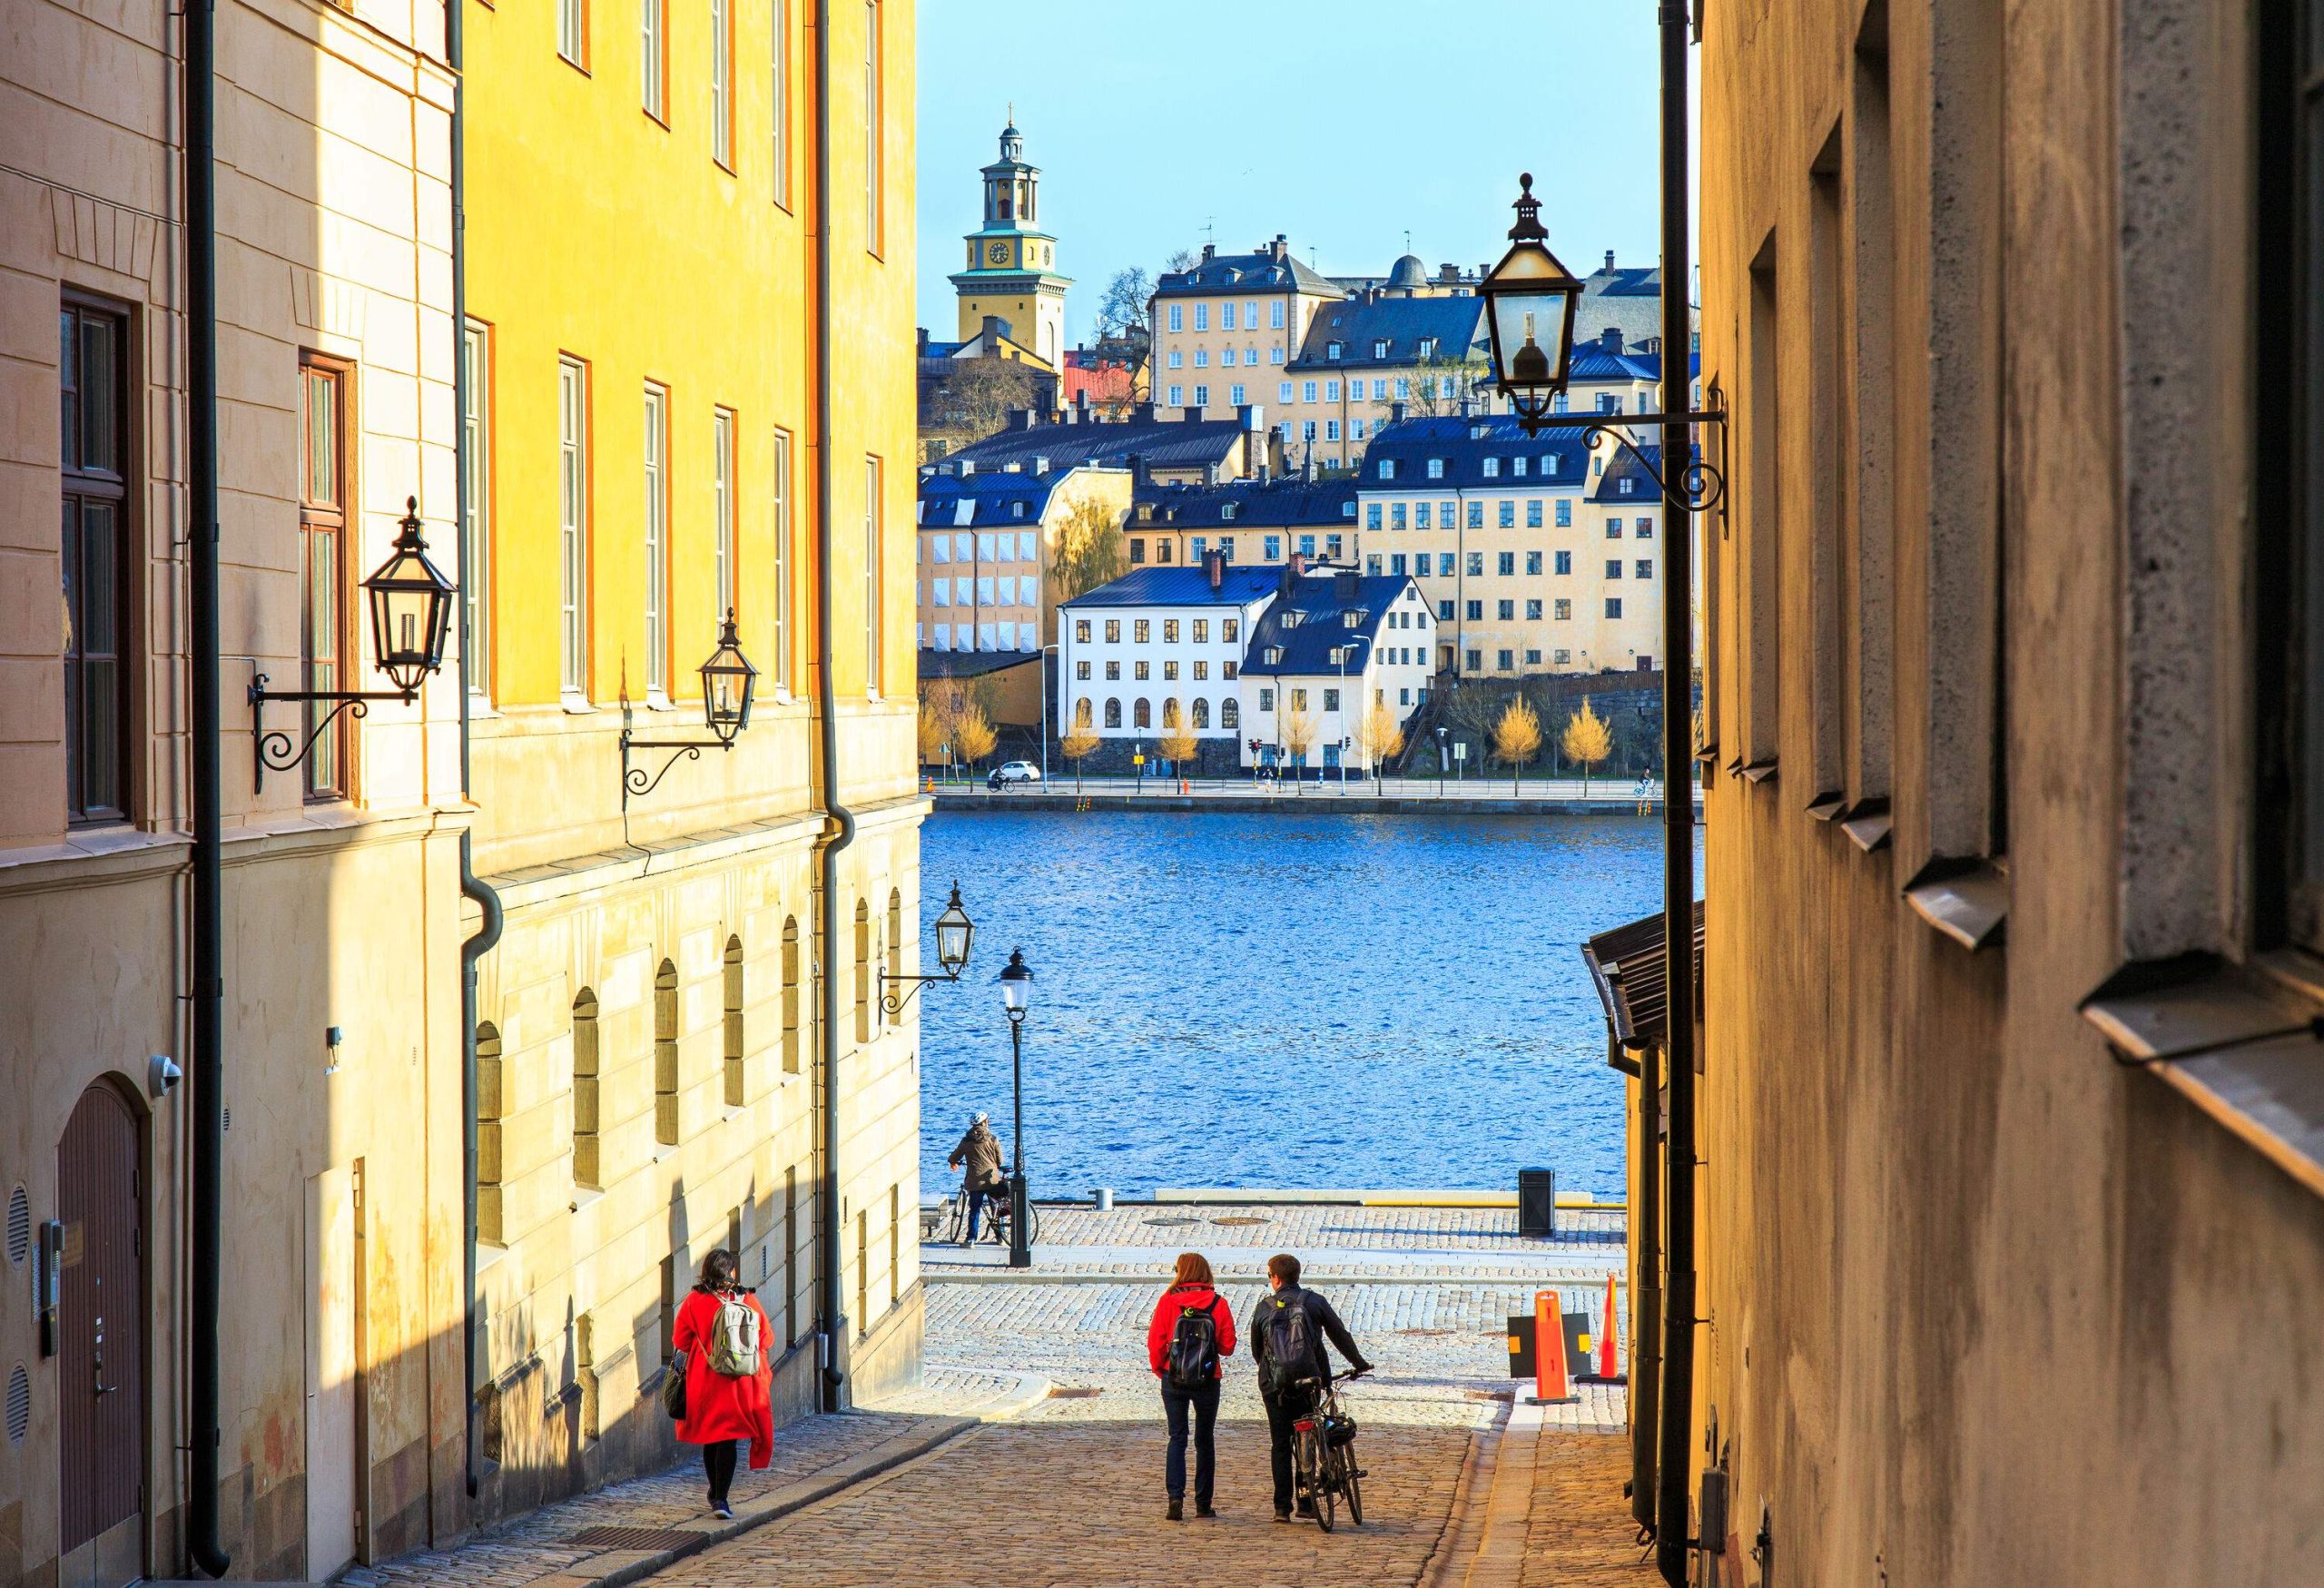 People on a cobbled street with a view of classic and elegant buildings across the waters.